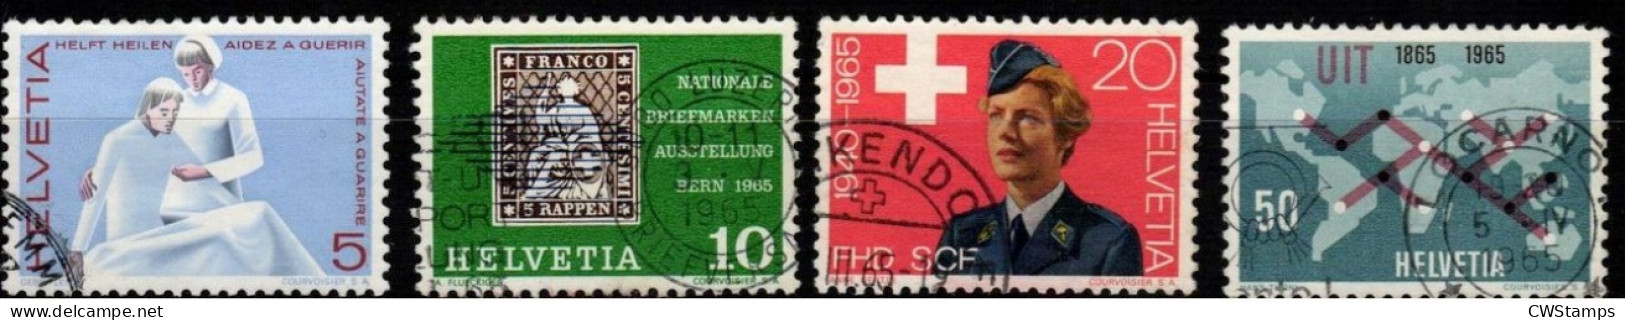 .. Zwitserland 1965   Mi 808/11 - Used Stamps